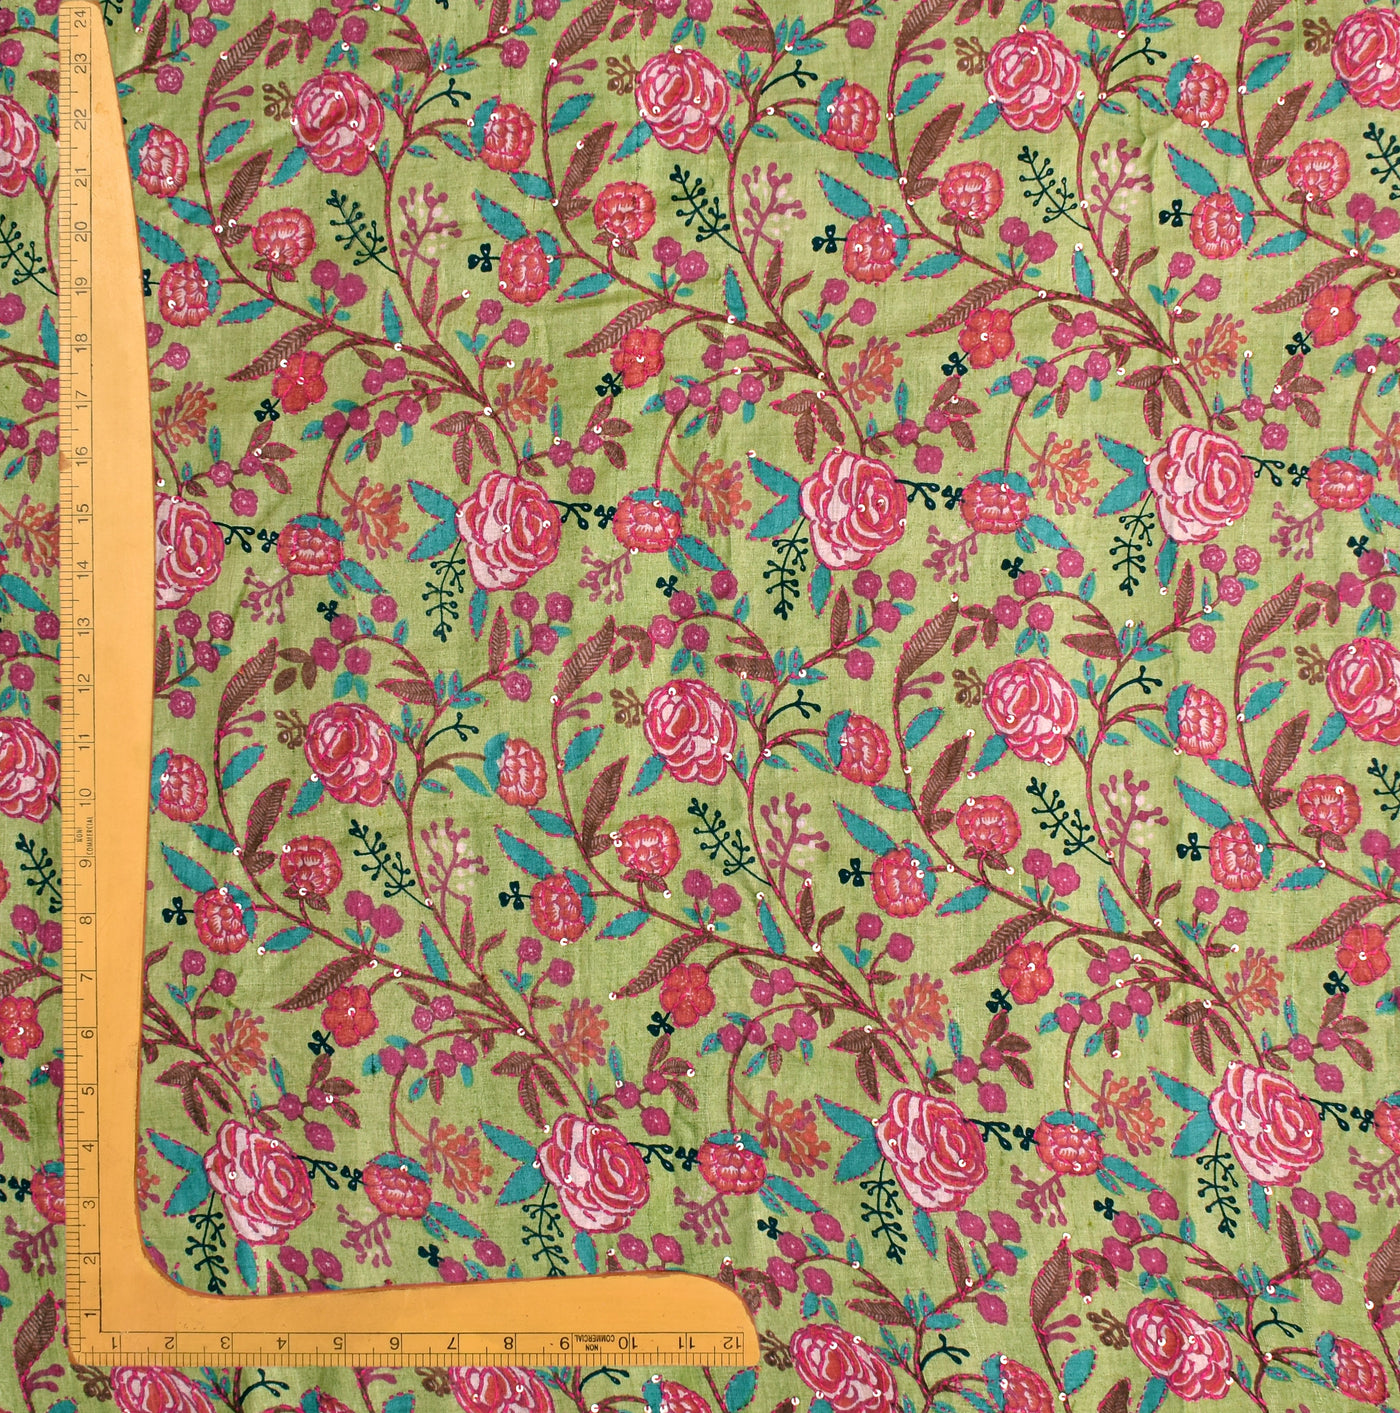 Apple Green Tussar Silk Fabric with Floral Kantha Work Design